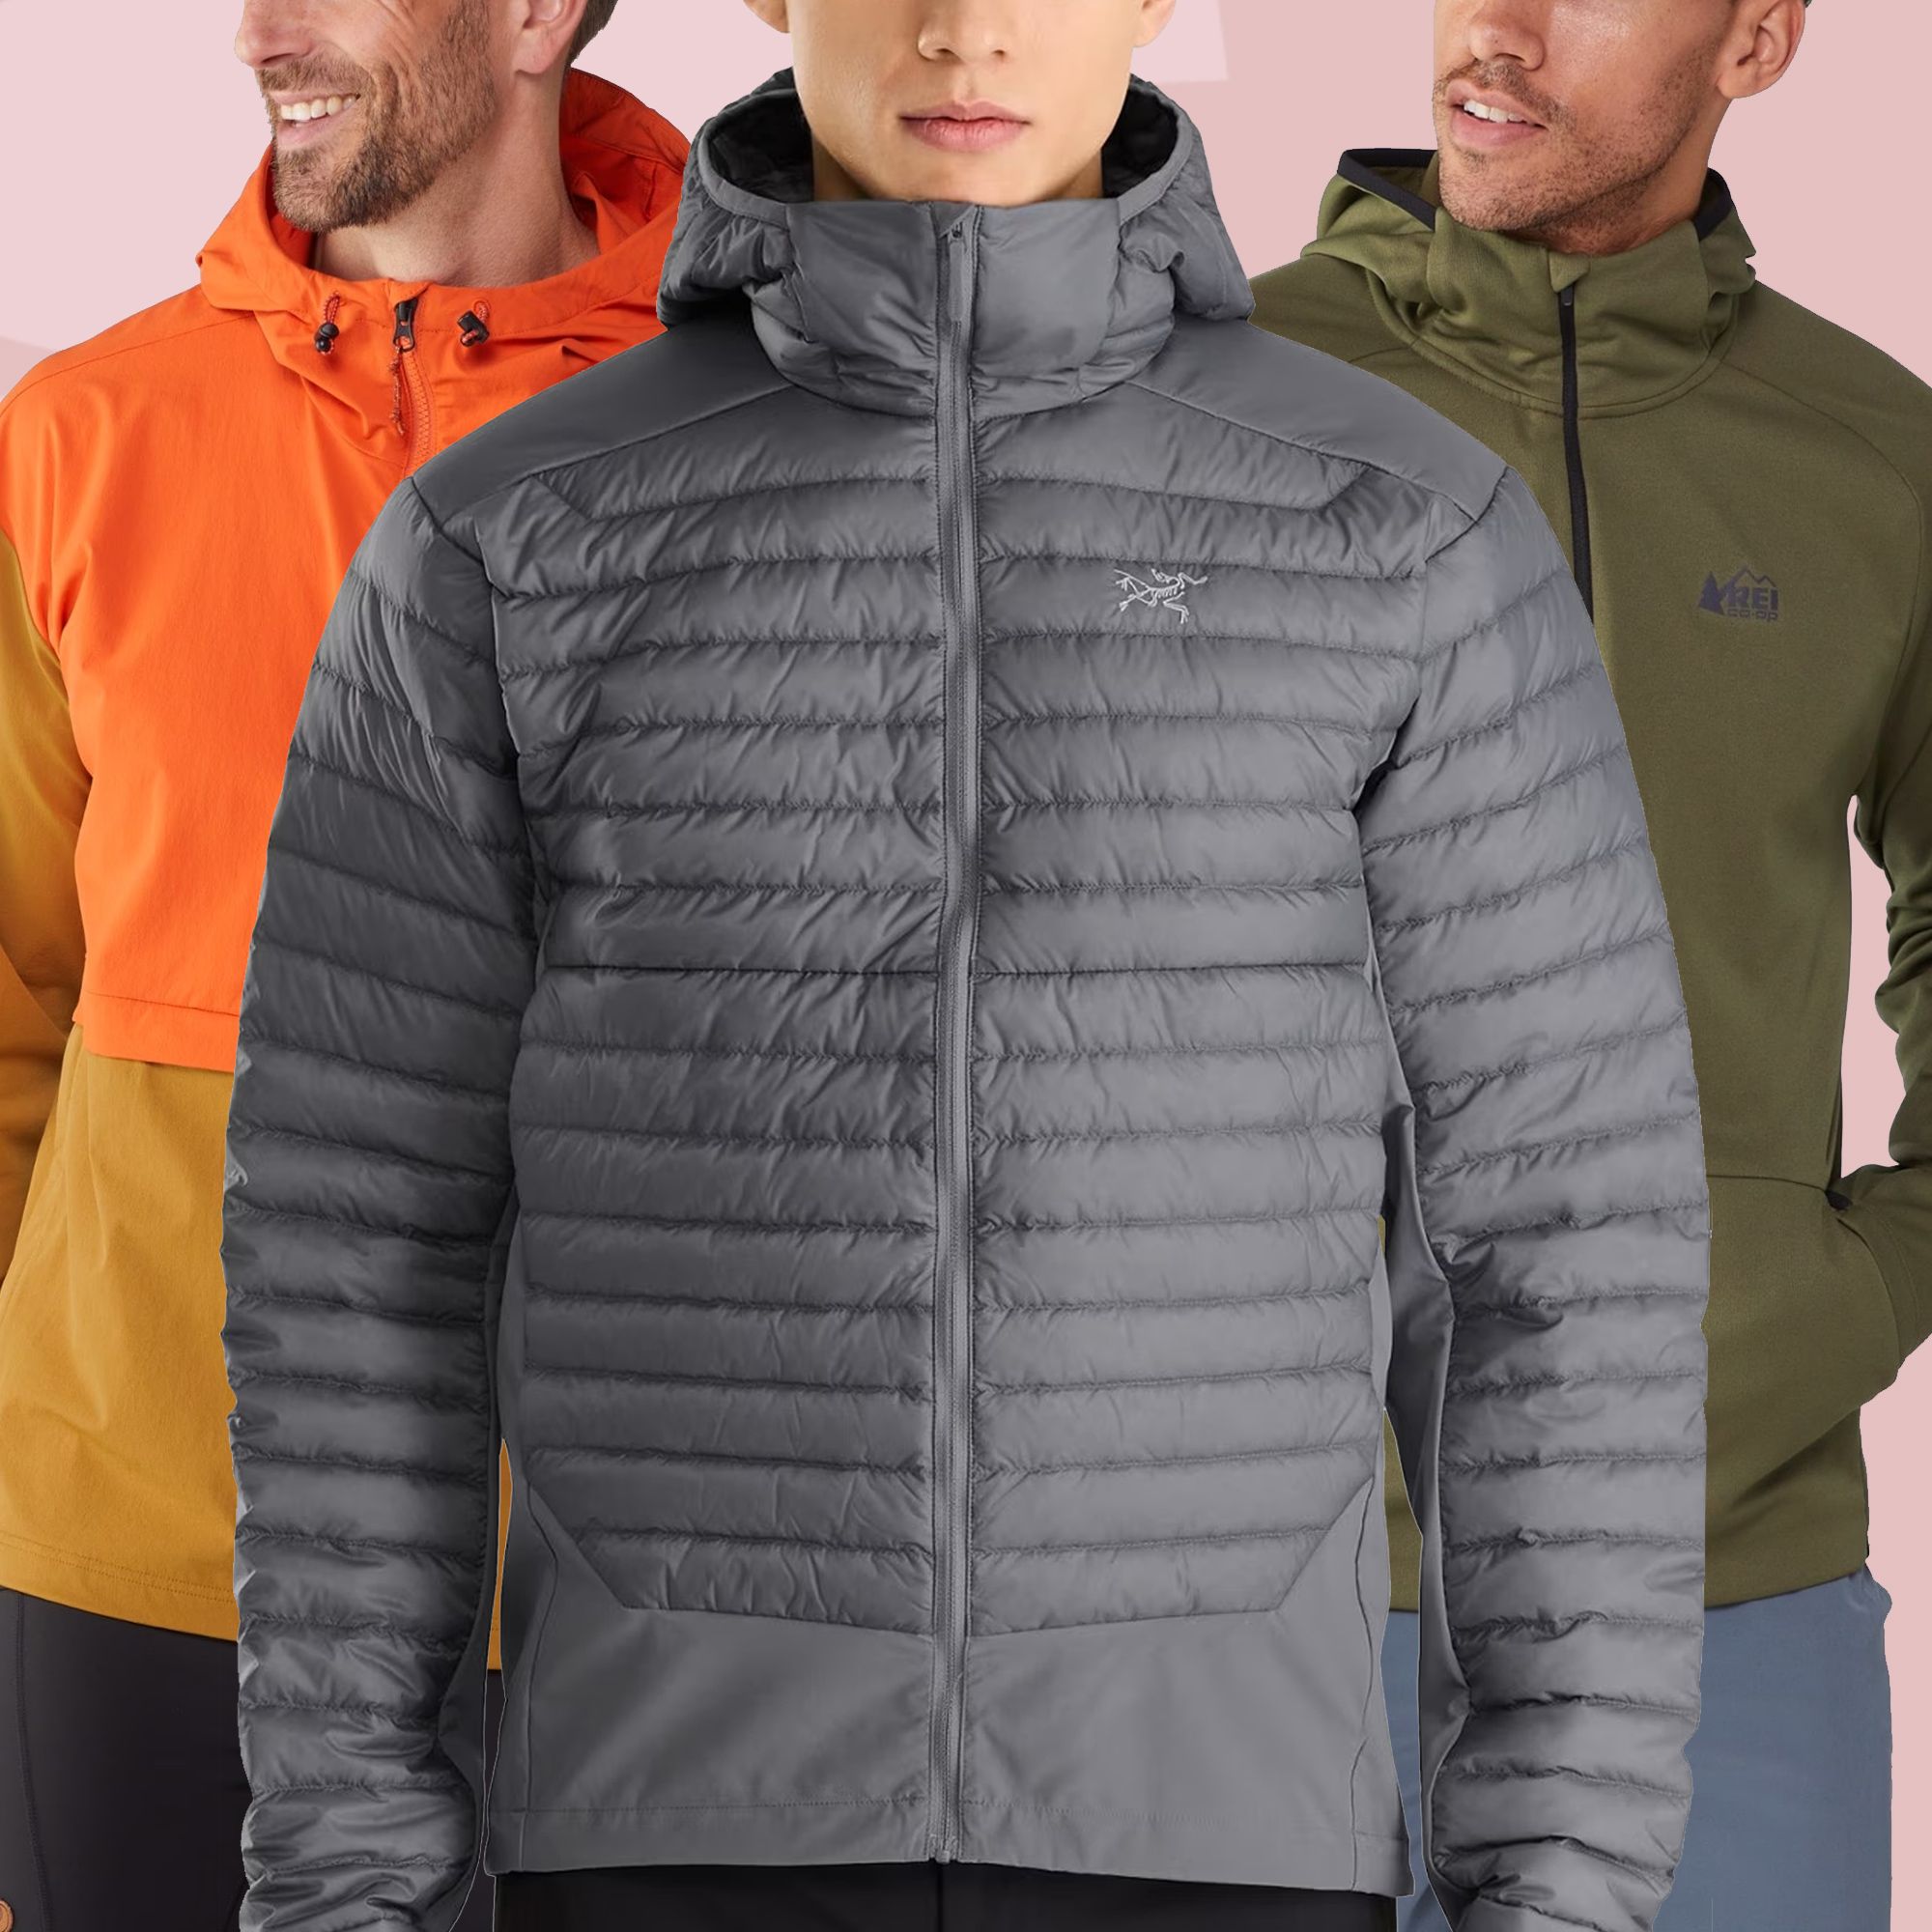 30% Off Arc'teryx and All The Best Deals at REI